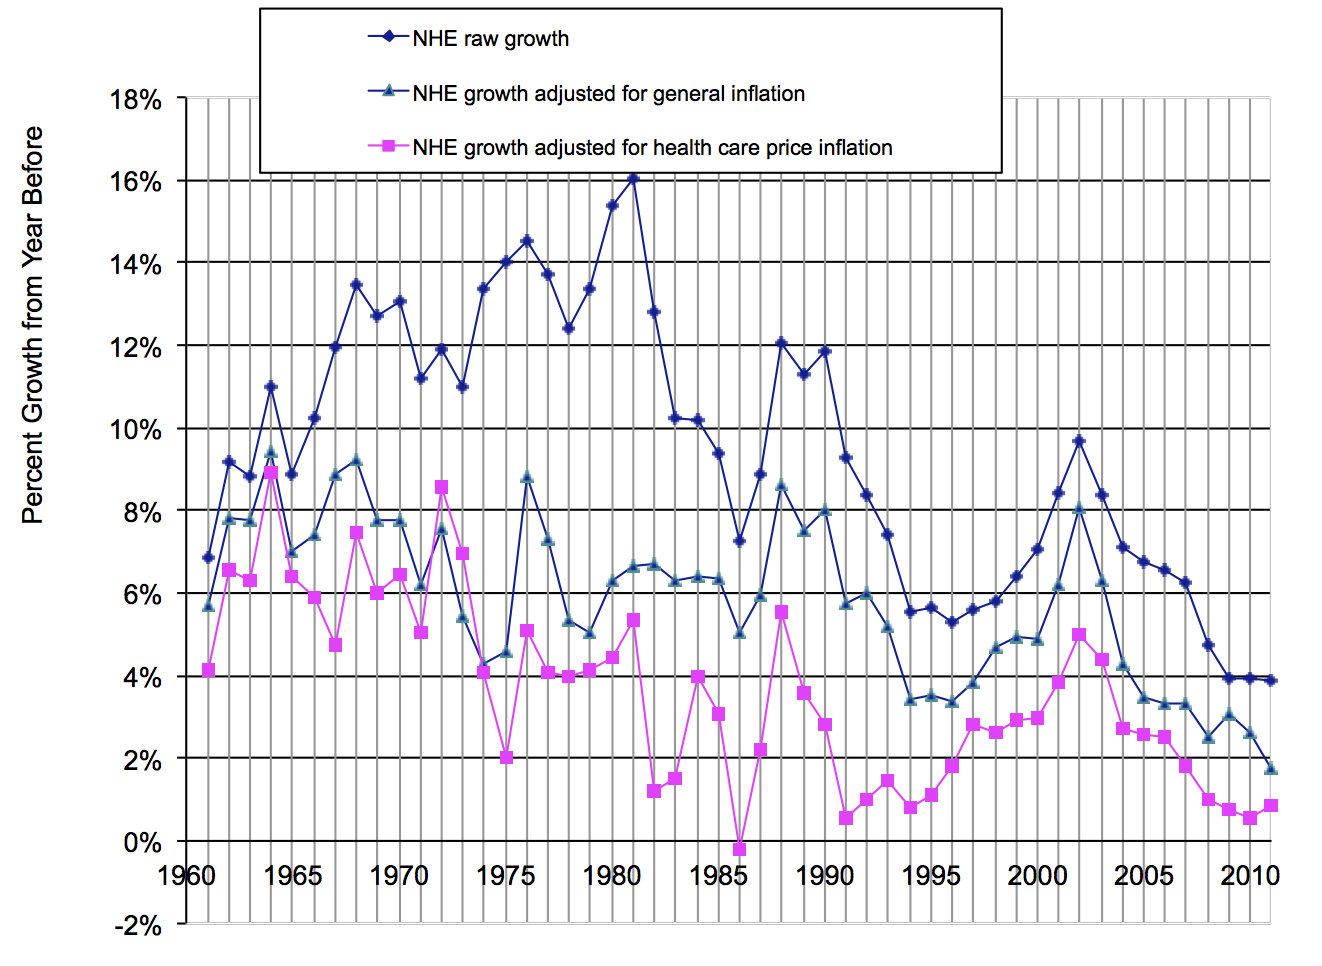 NHE growth rates adjusted for inflation